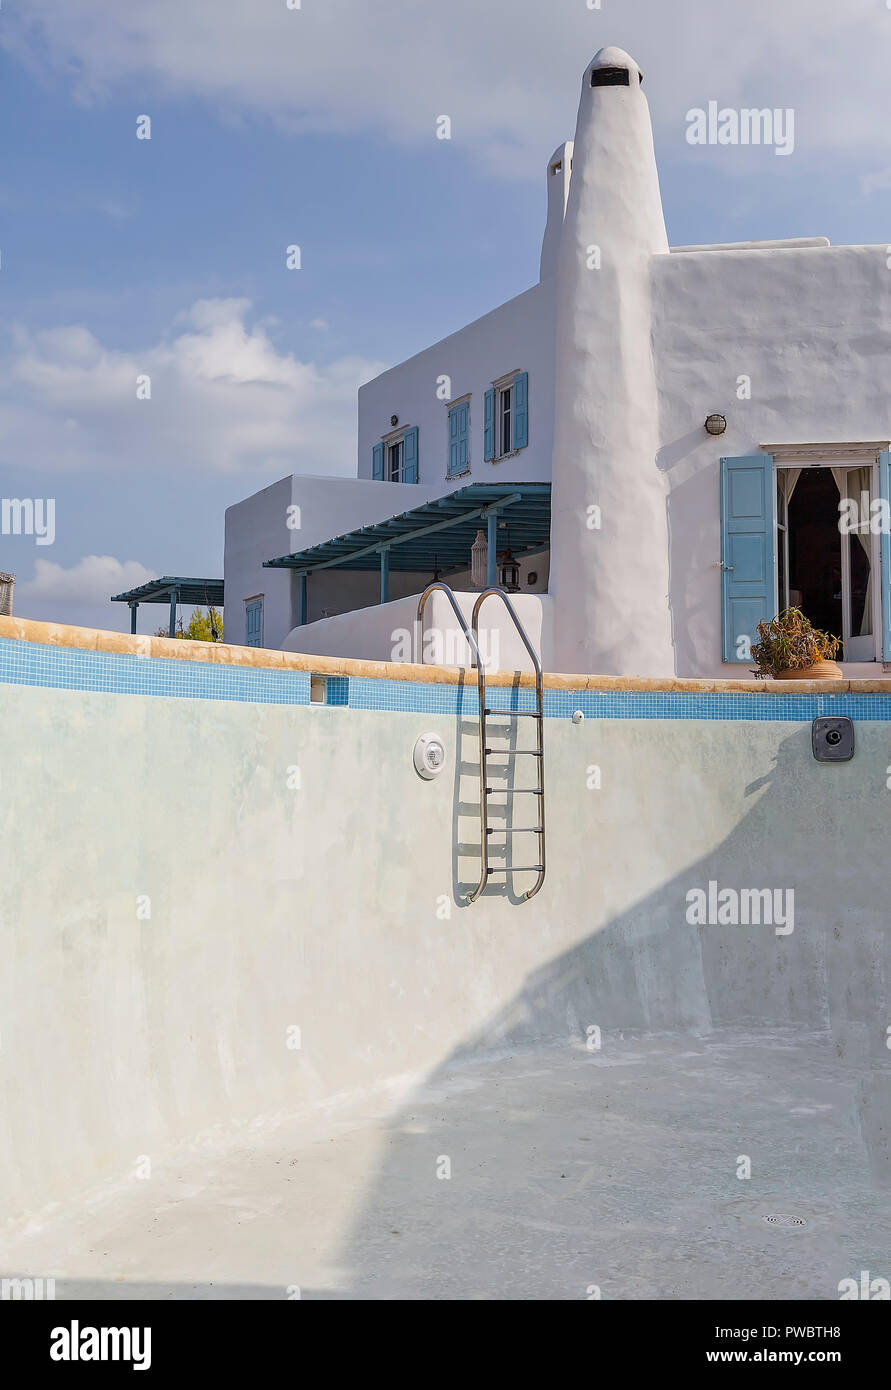 Empty Swimming Pool. A typical Cycladic Architecture  of a Greek Island house  in the background. Stock Photo